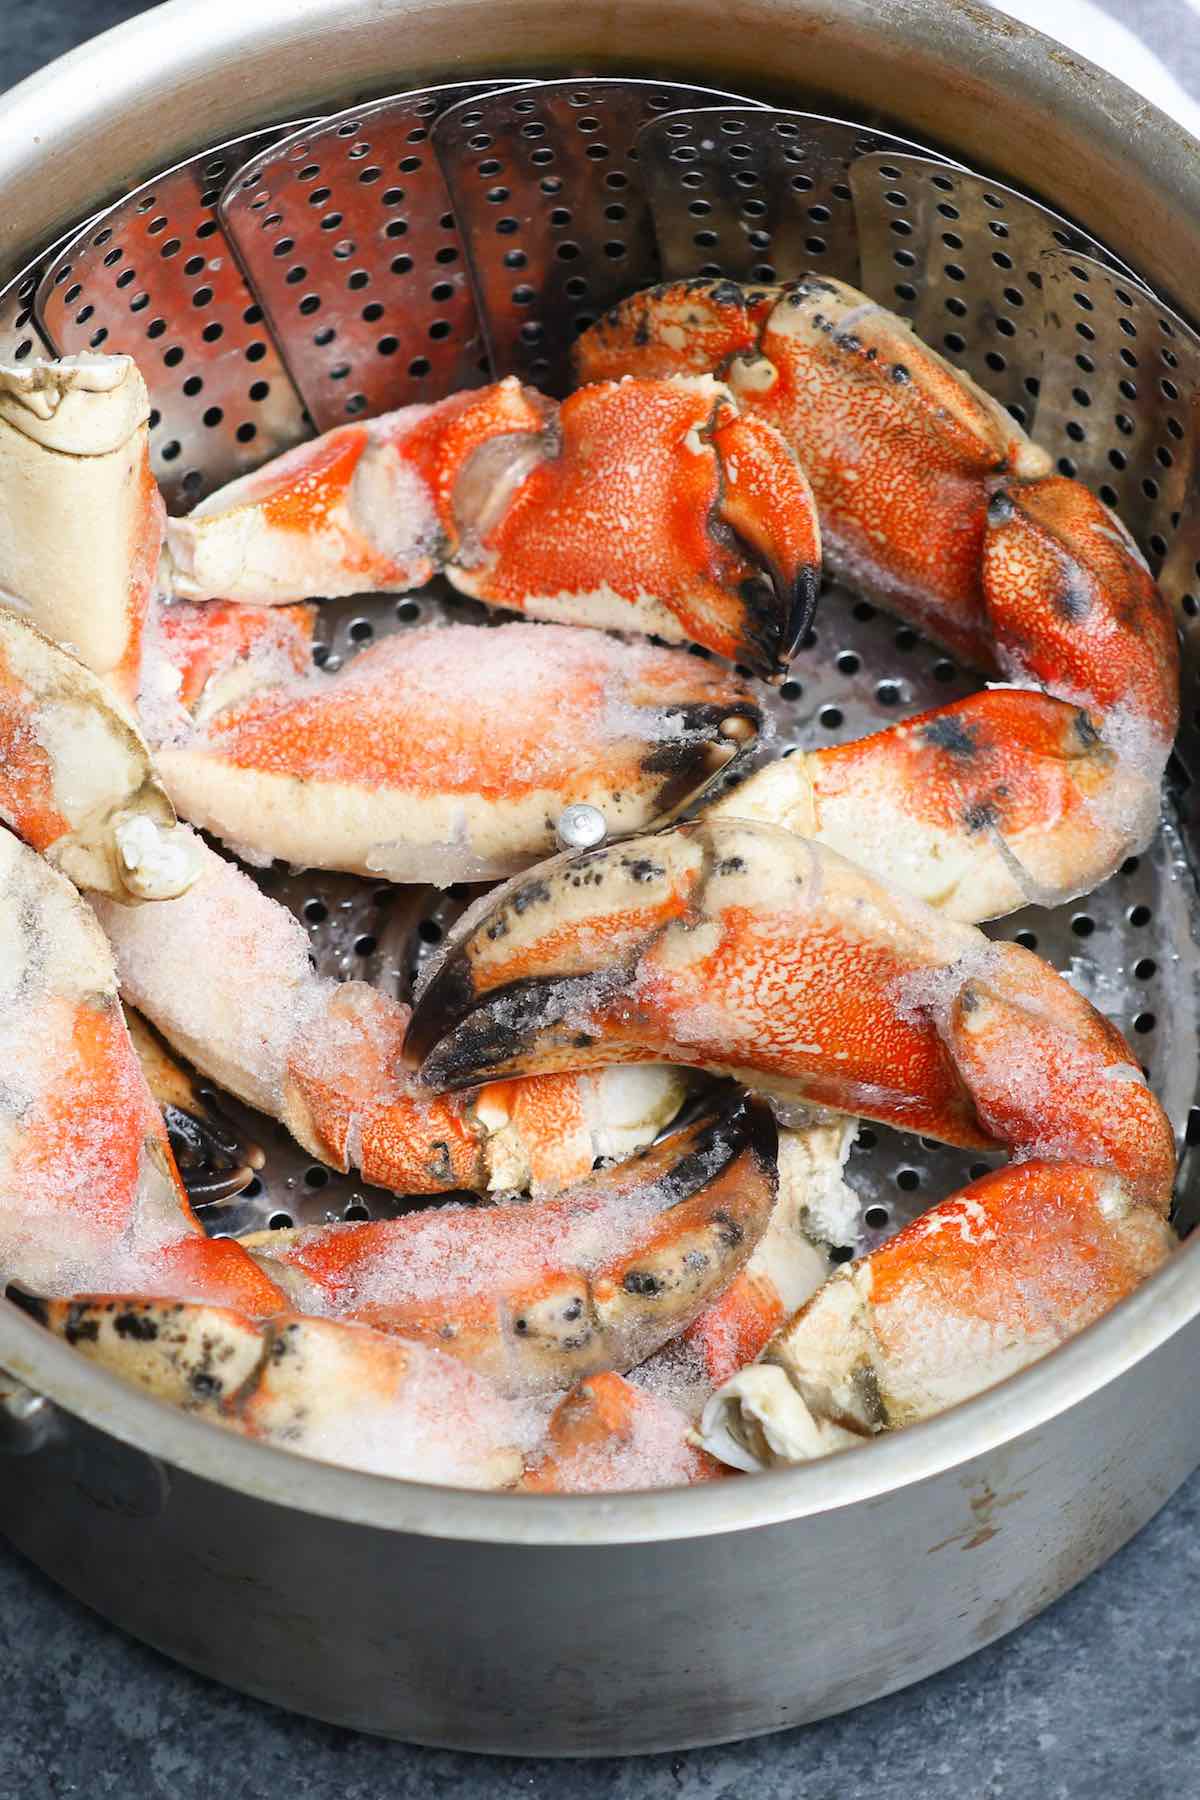 Defrosting frozen Jonah crab claws 